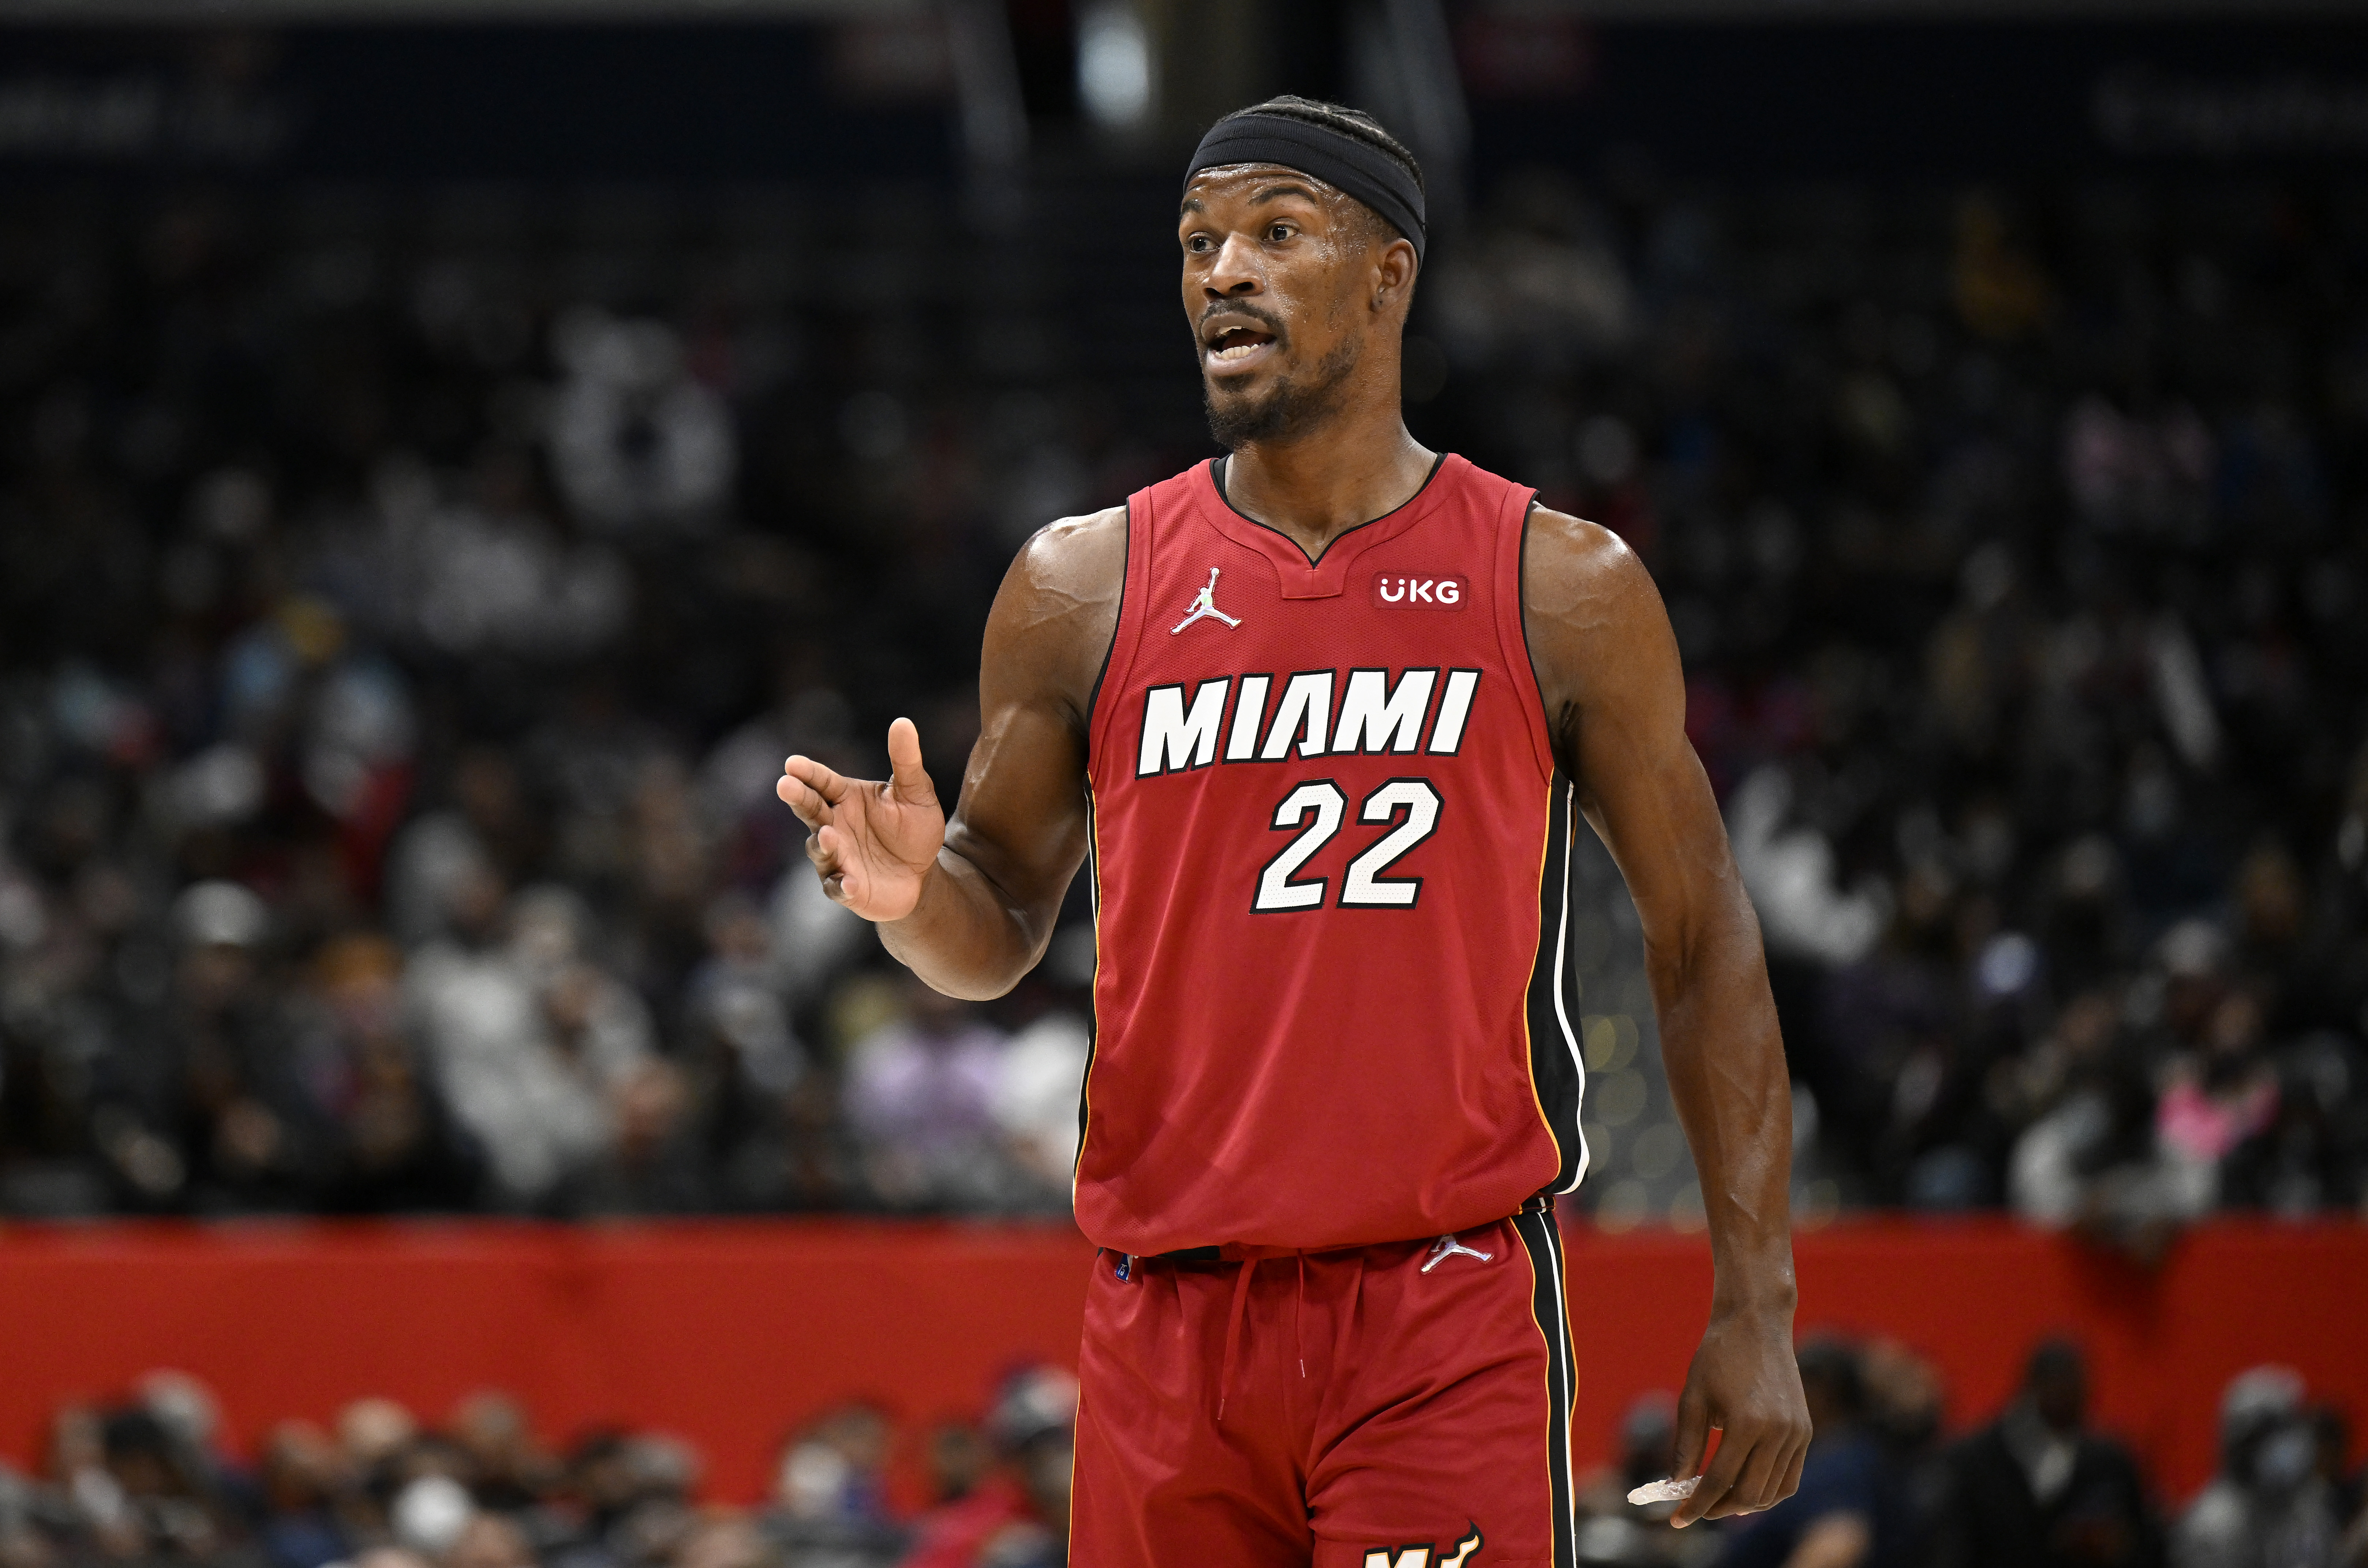 Miami Heat star Jimmy Butler barks out orders during an NBA game against the Washington Wizards in February 2022